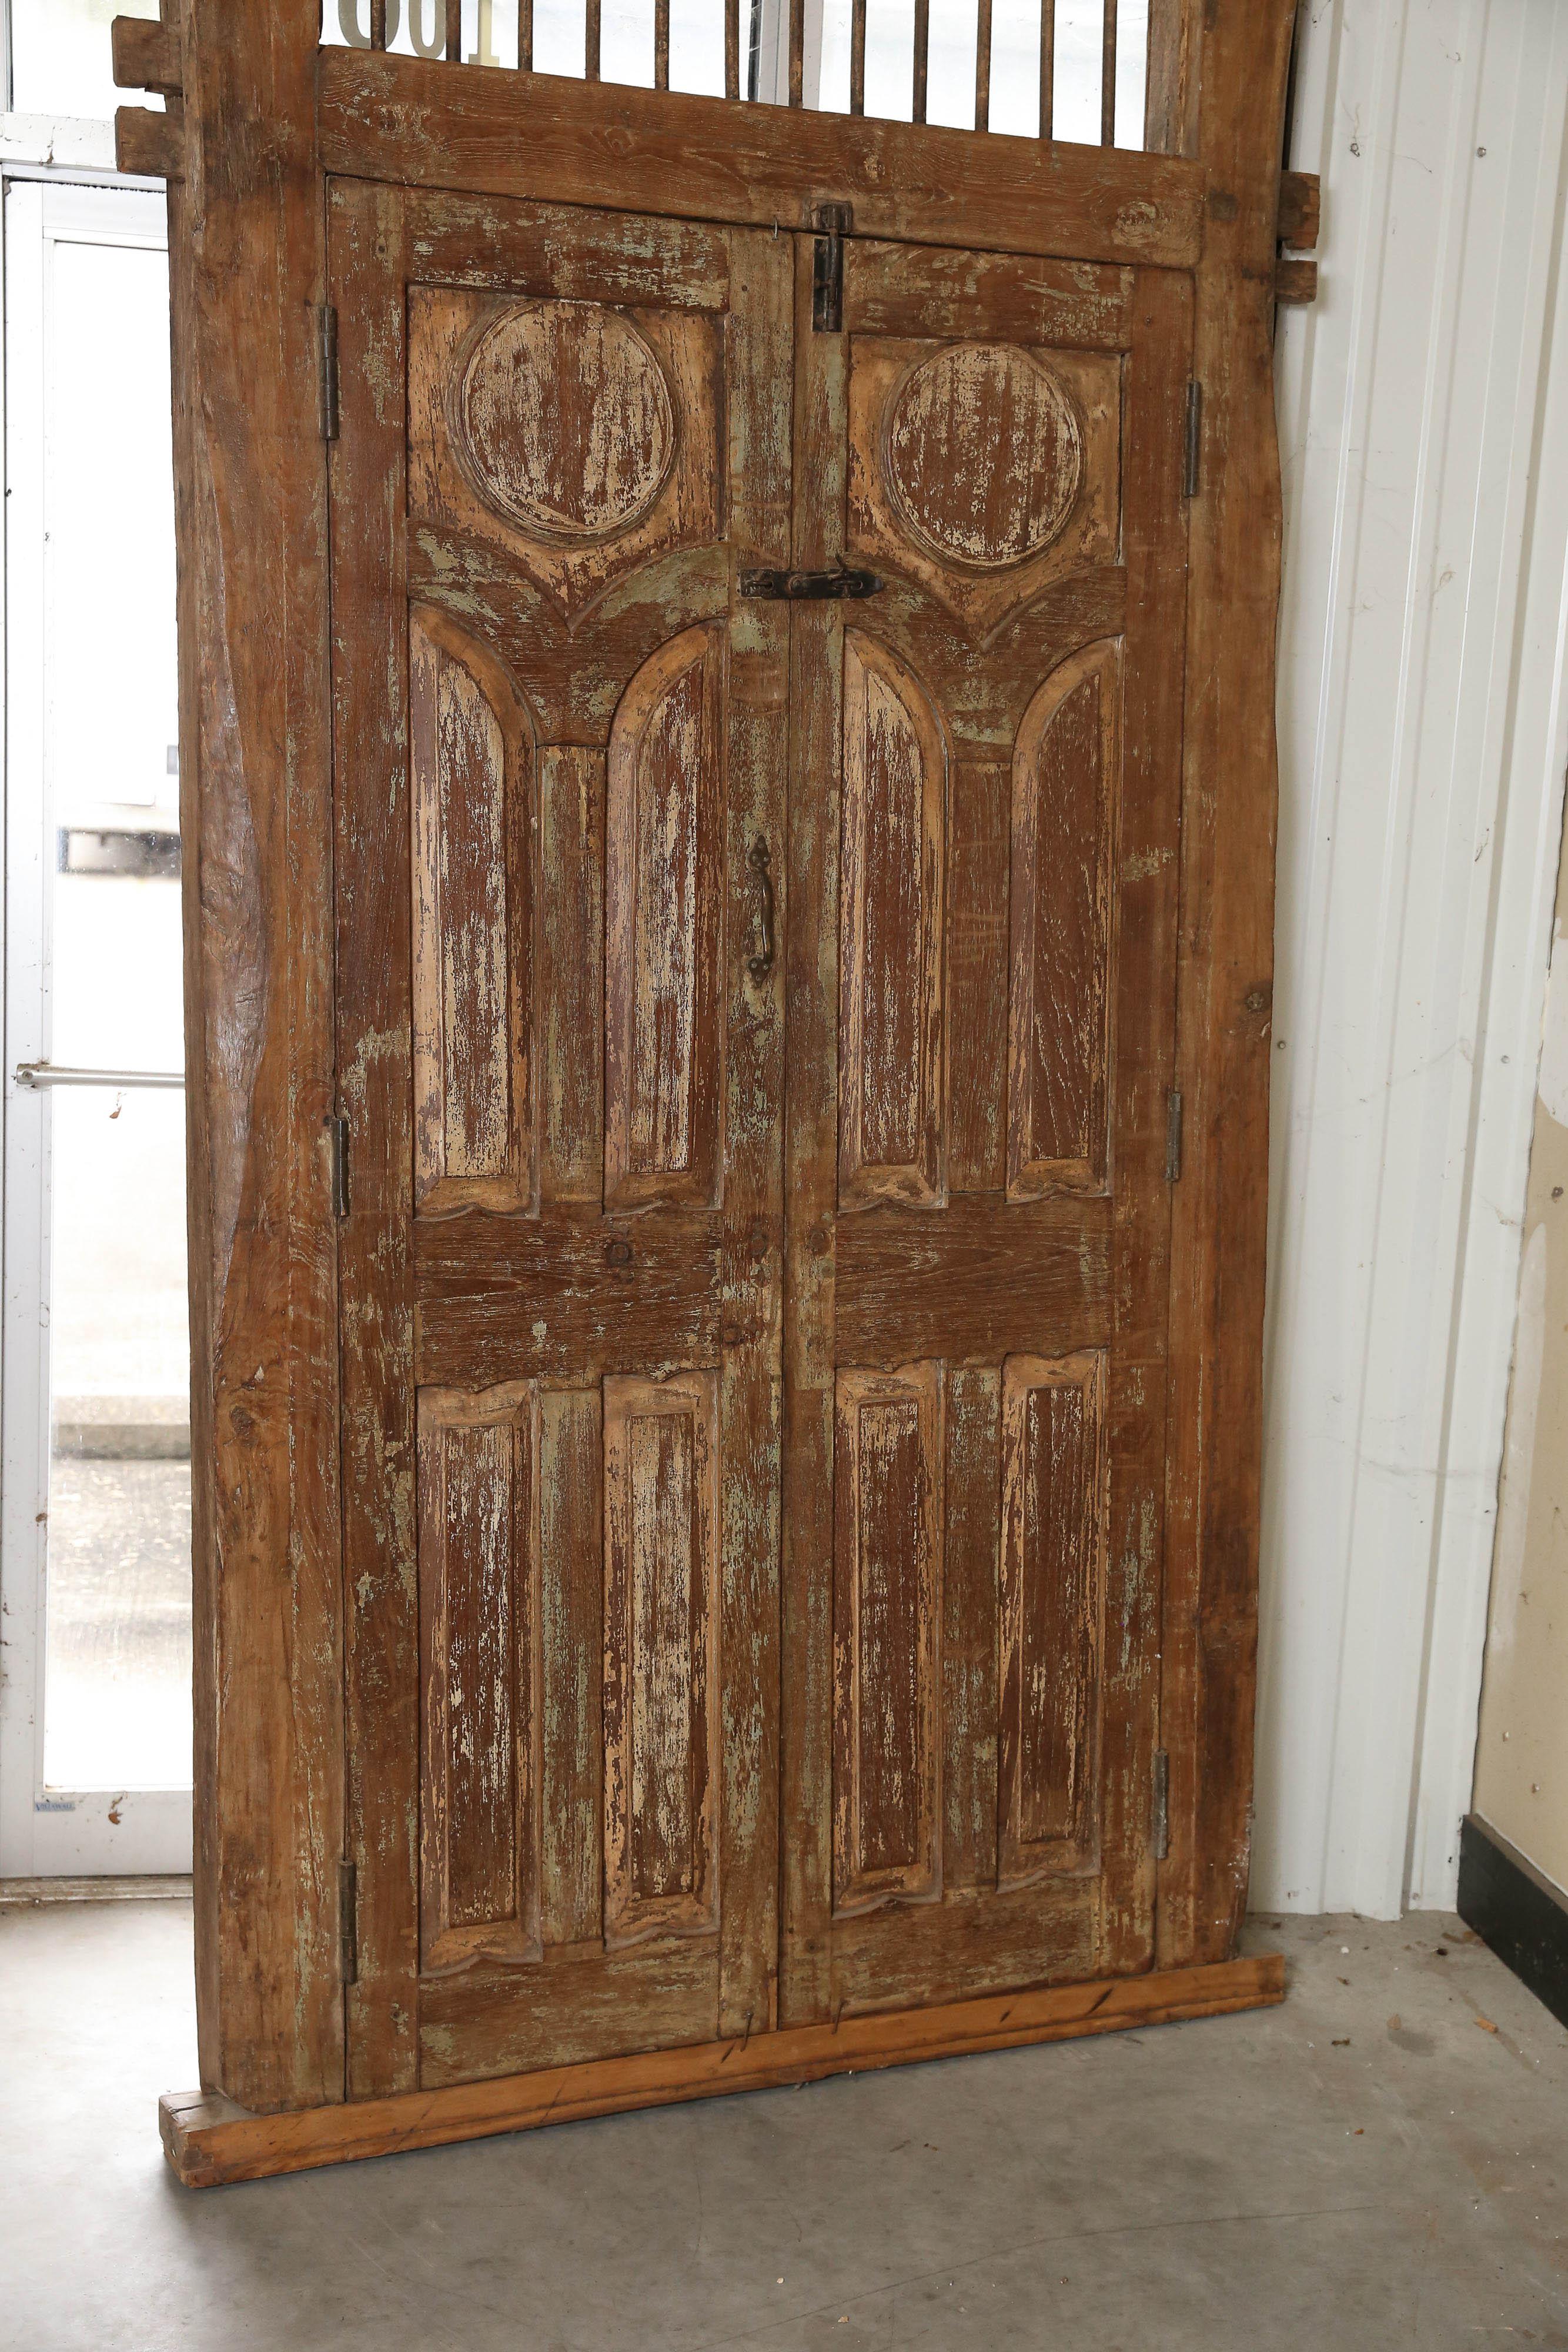 Grand Mid-19th Century Solid Teak Wood Entry Door from a Colonial Mansion For Sale 1